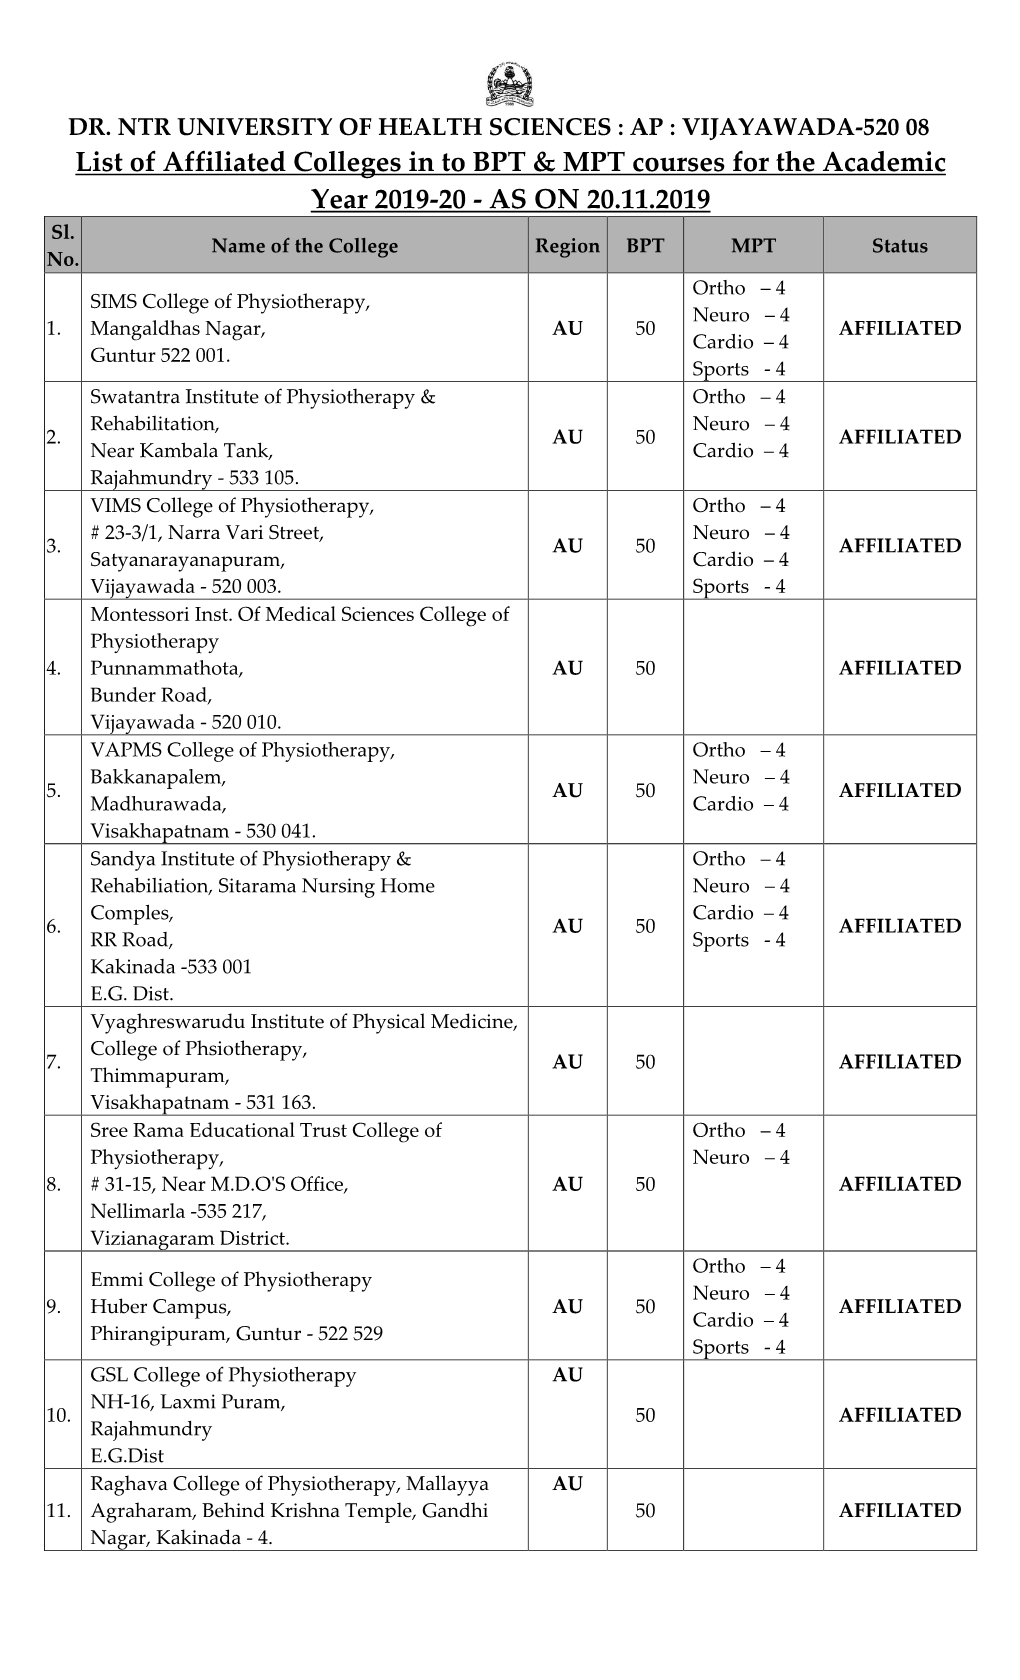 List of Affiliated Colleges in to BPT & MPT Courses for the Academic Year